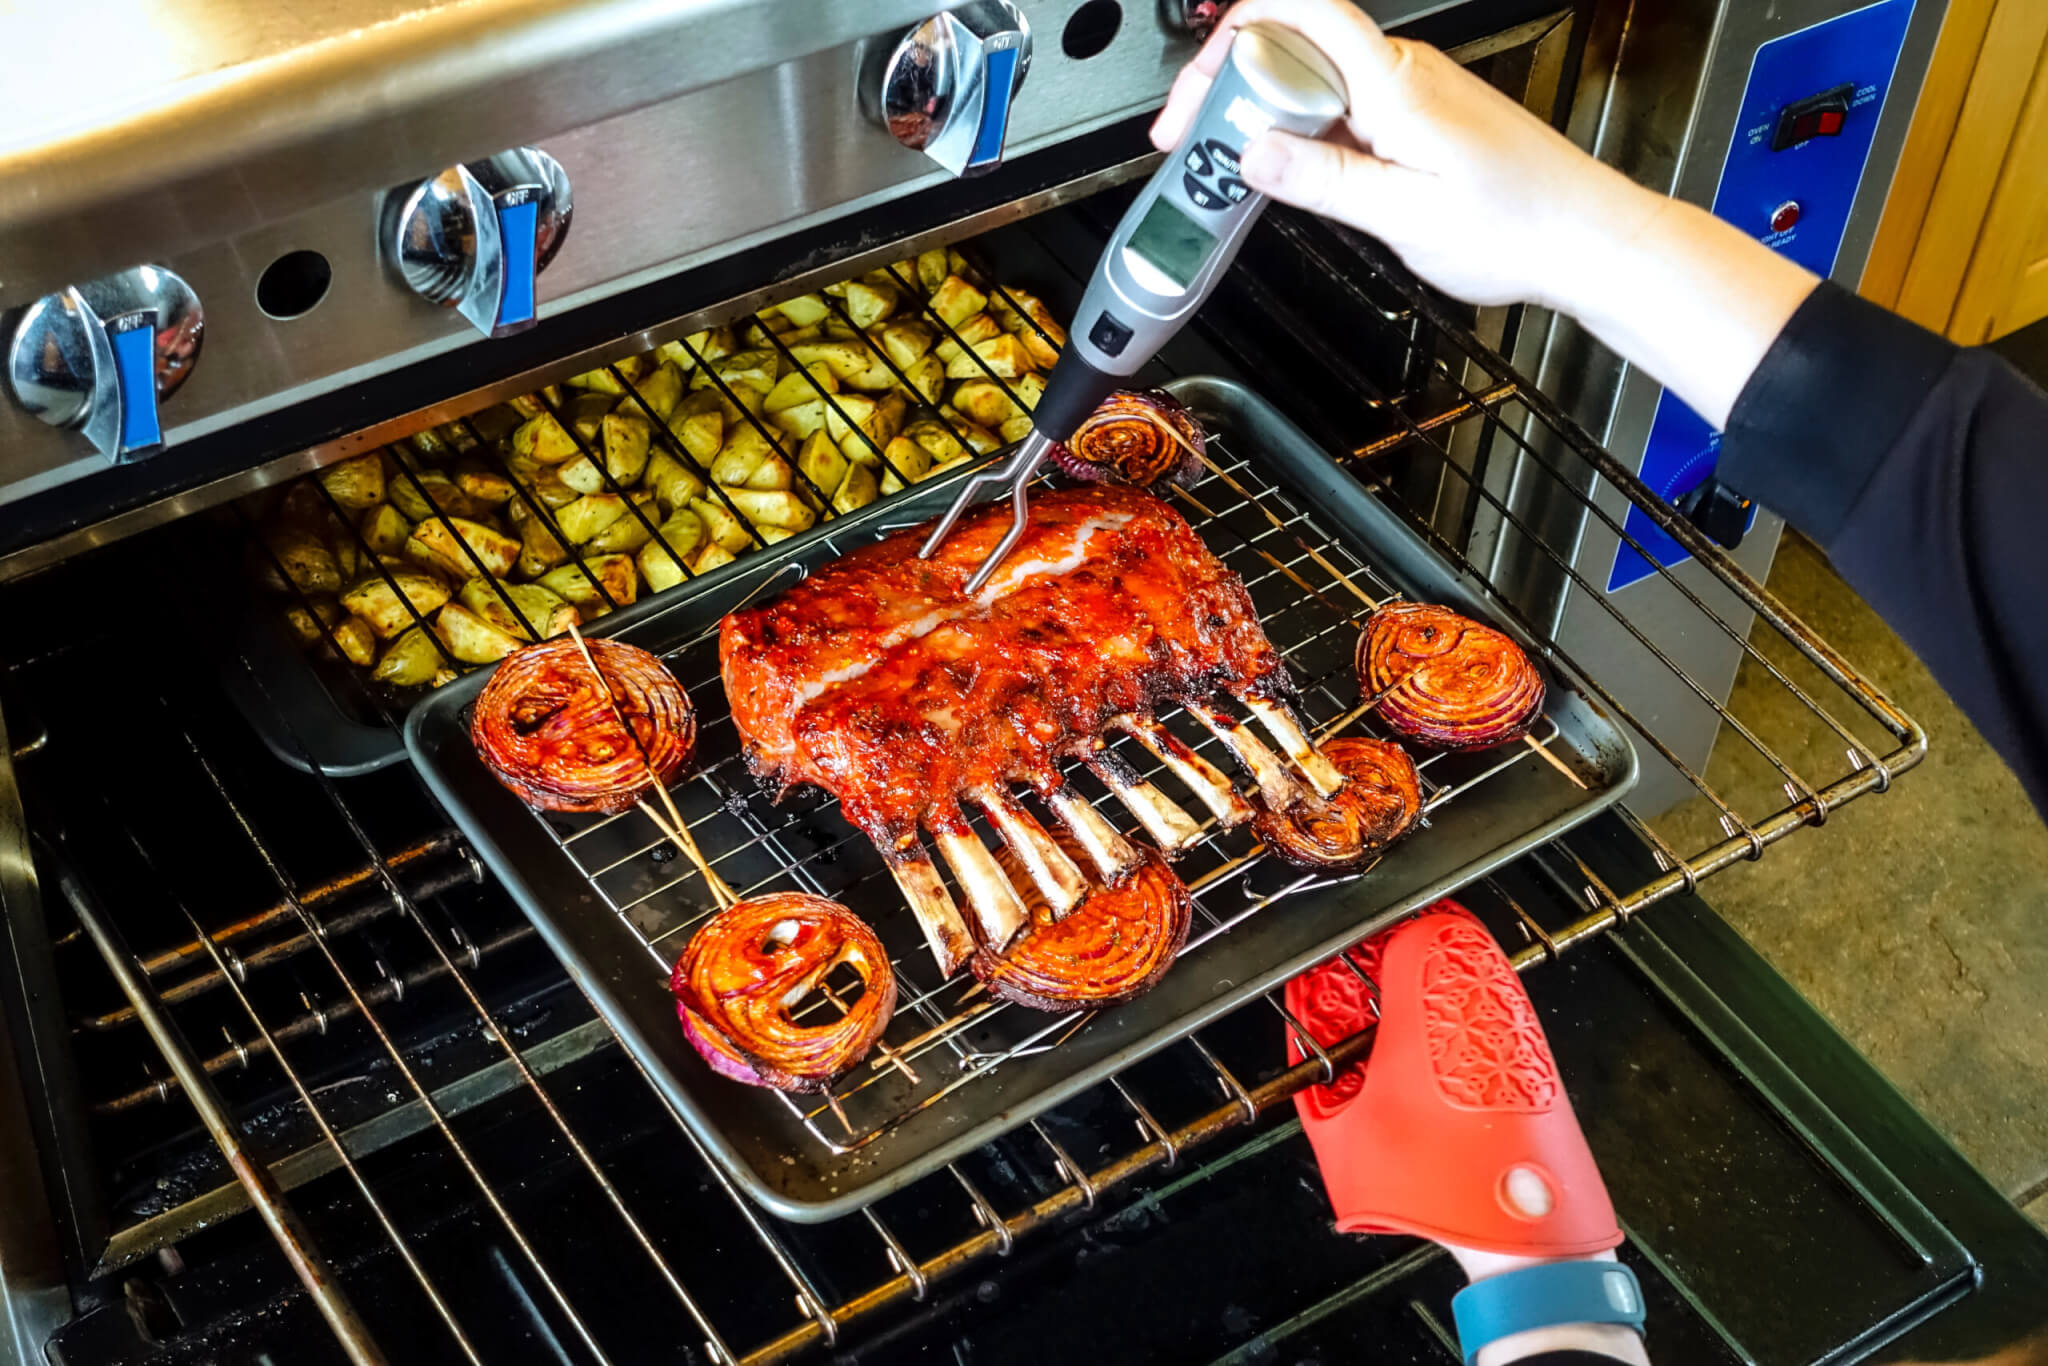 Cooking rack of lamb in oven and checking temperature with meat thermometer